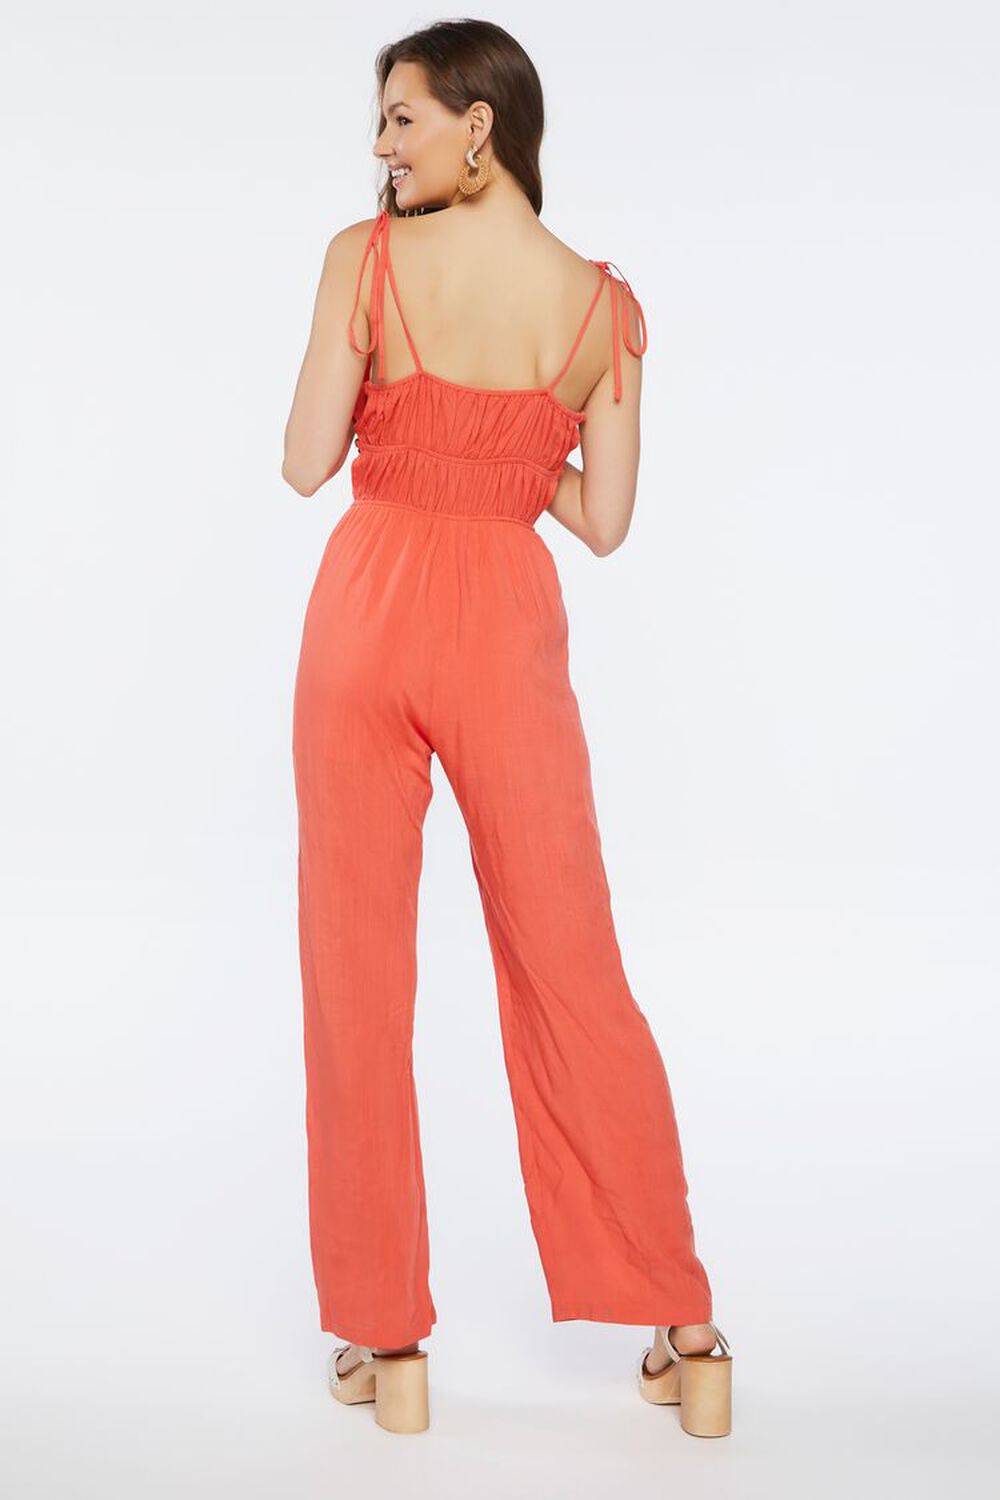 CORAL Ruched Tie-Strap Jumpsuit, image 3